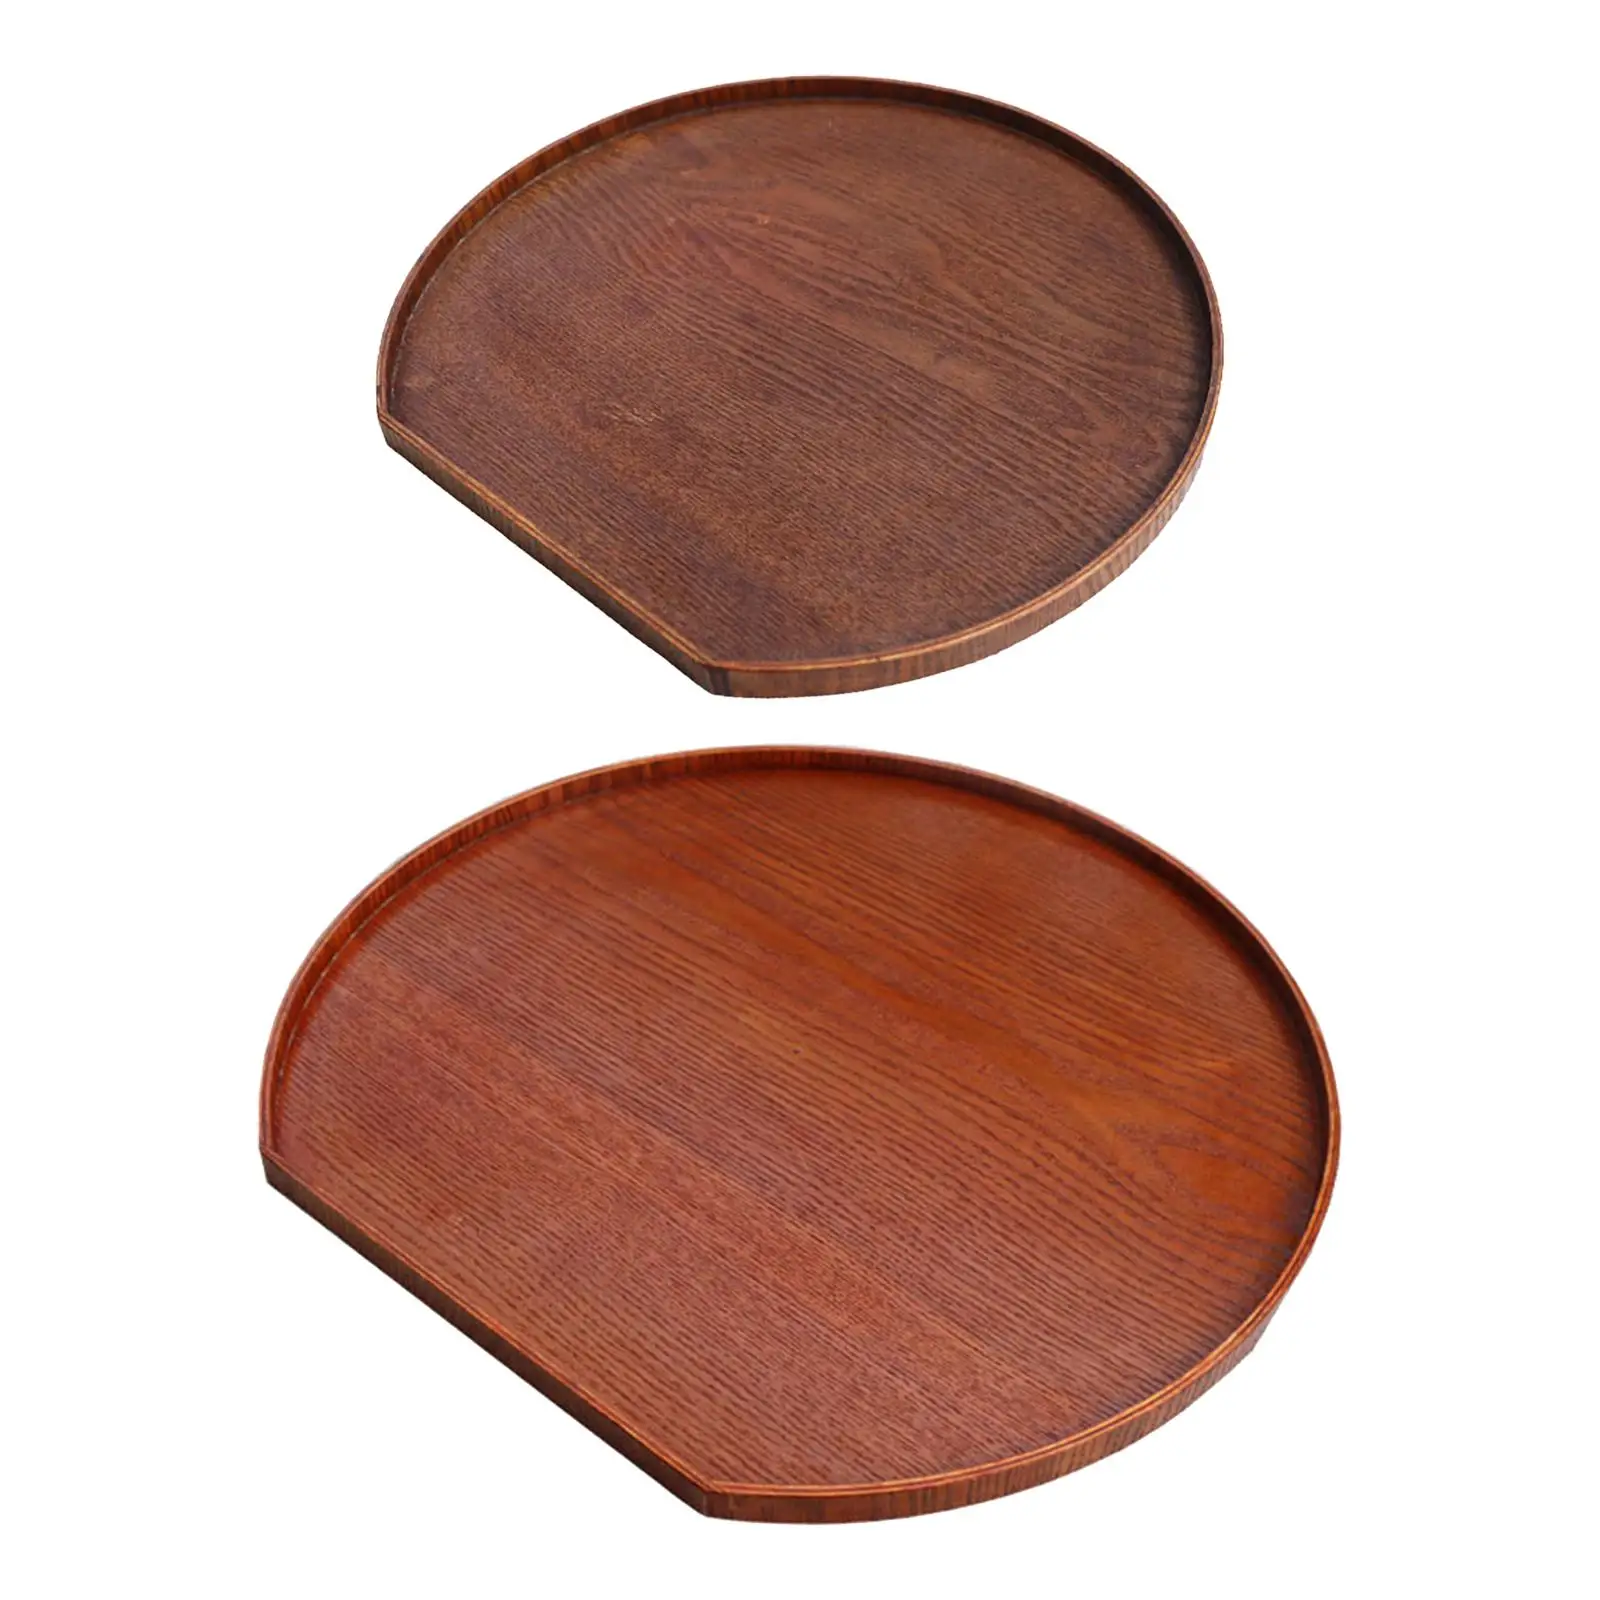 Wood Serving Tray Round Modern with Rim for Centerpiece Living Room Ottoman